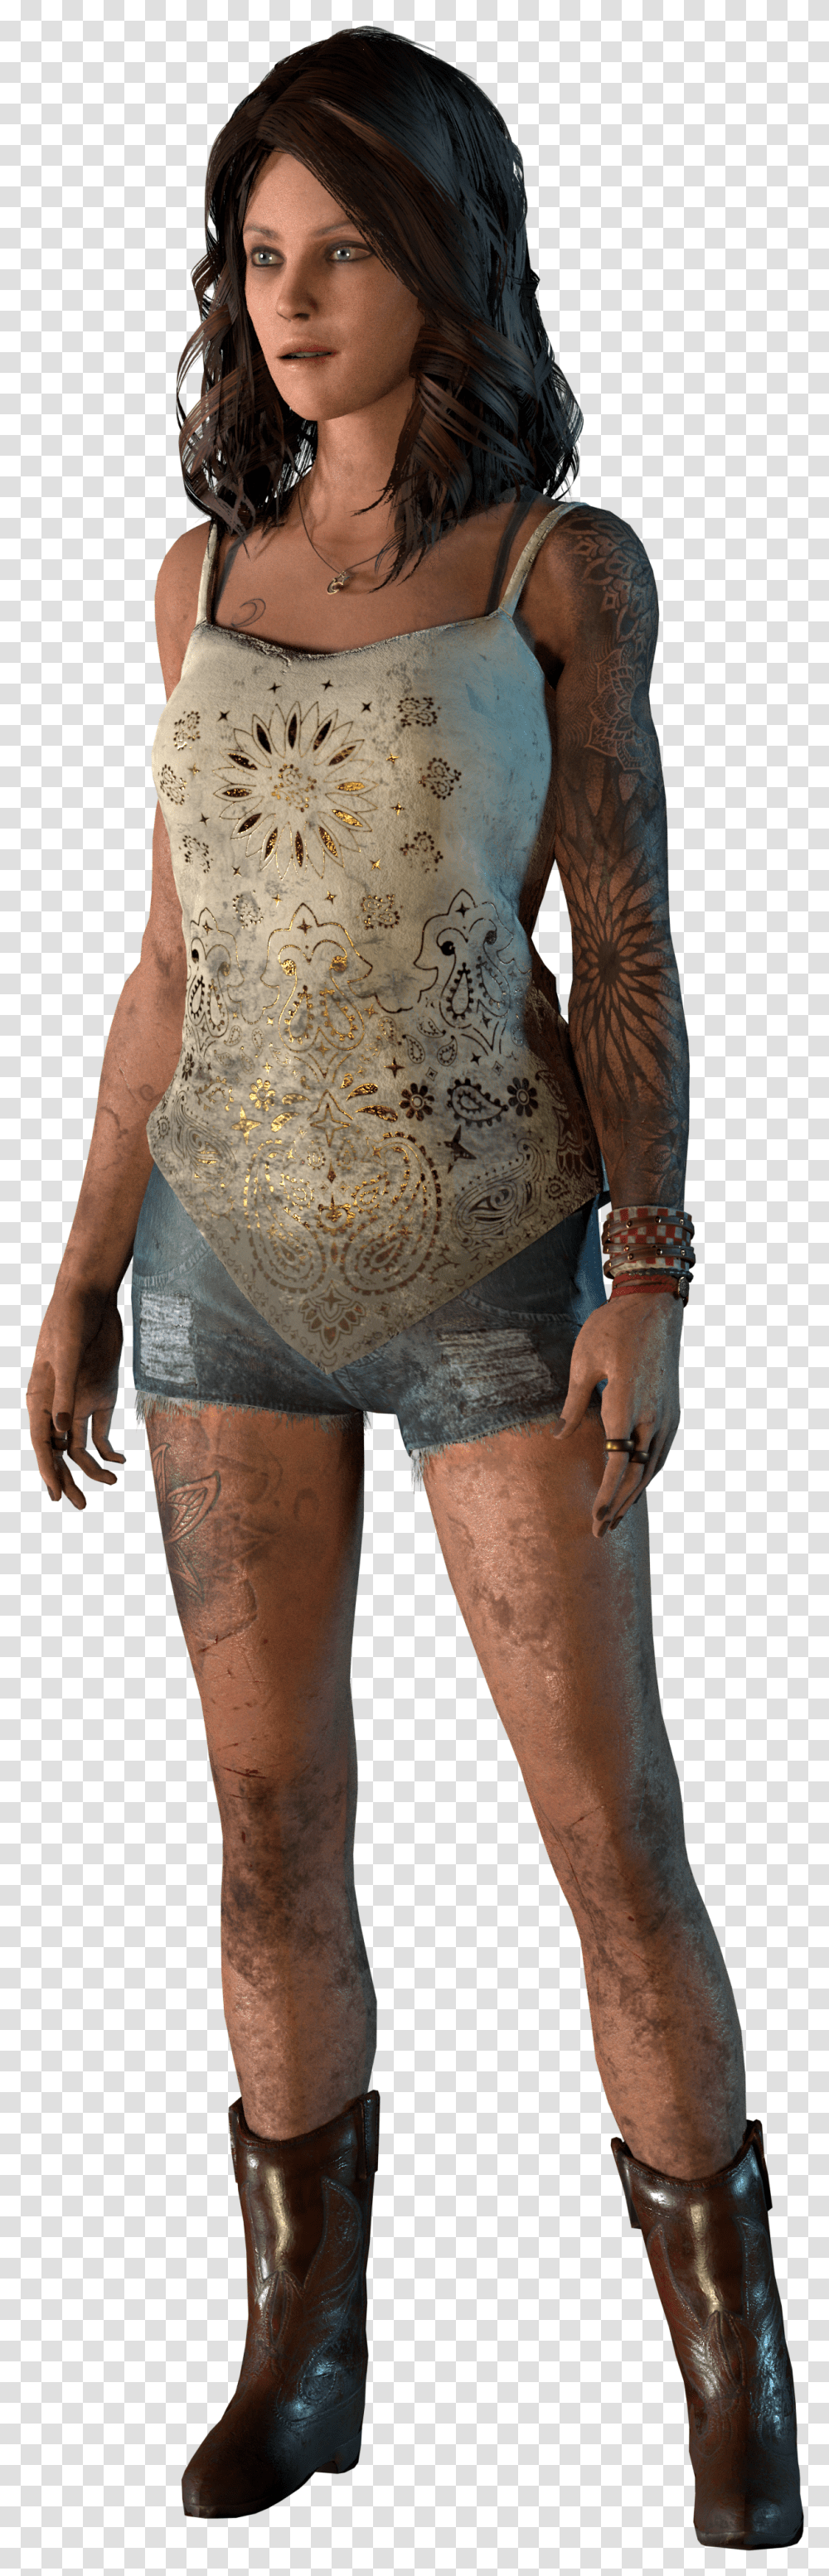 Dead Body Background Dead By Daylight Kate Denson Transparent Png